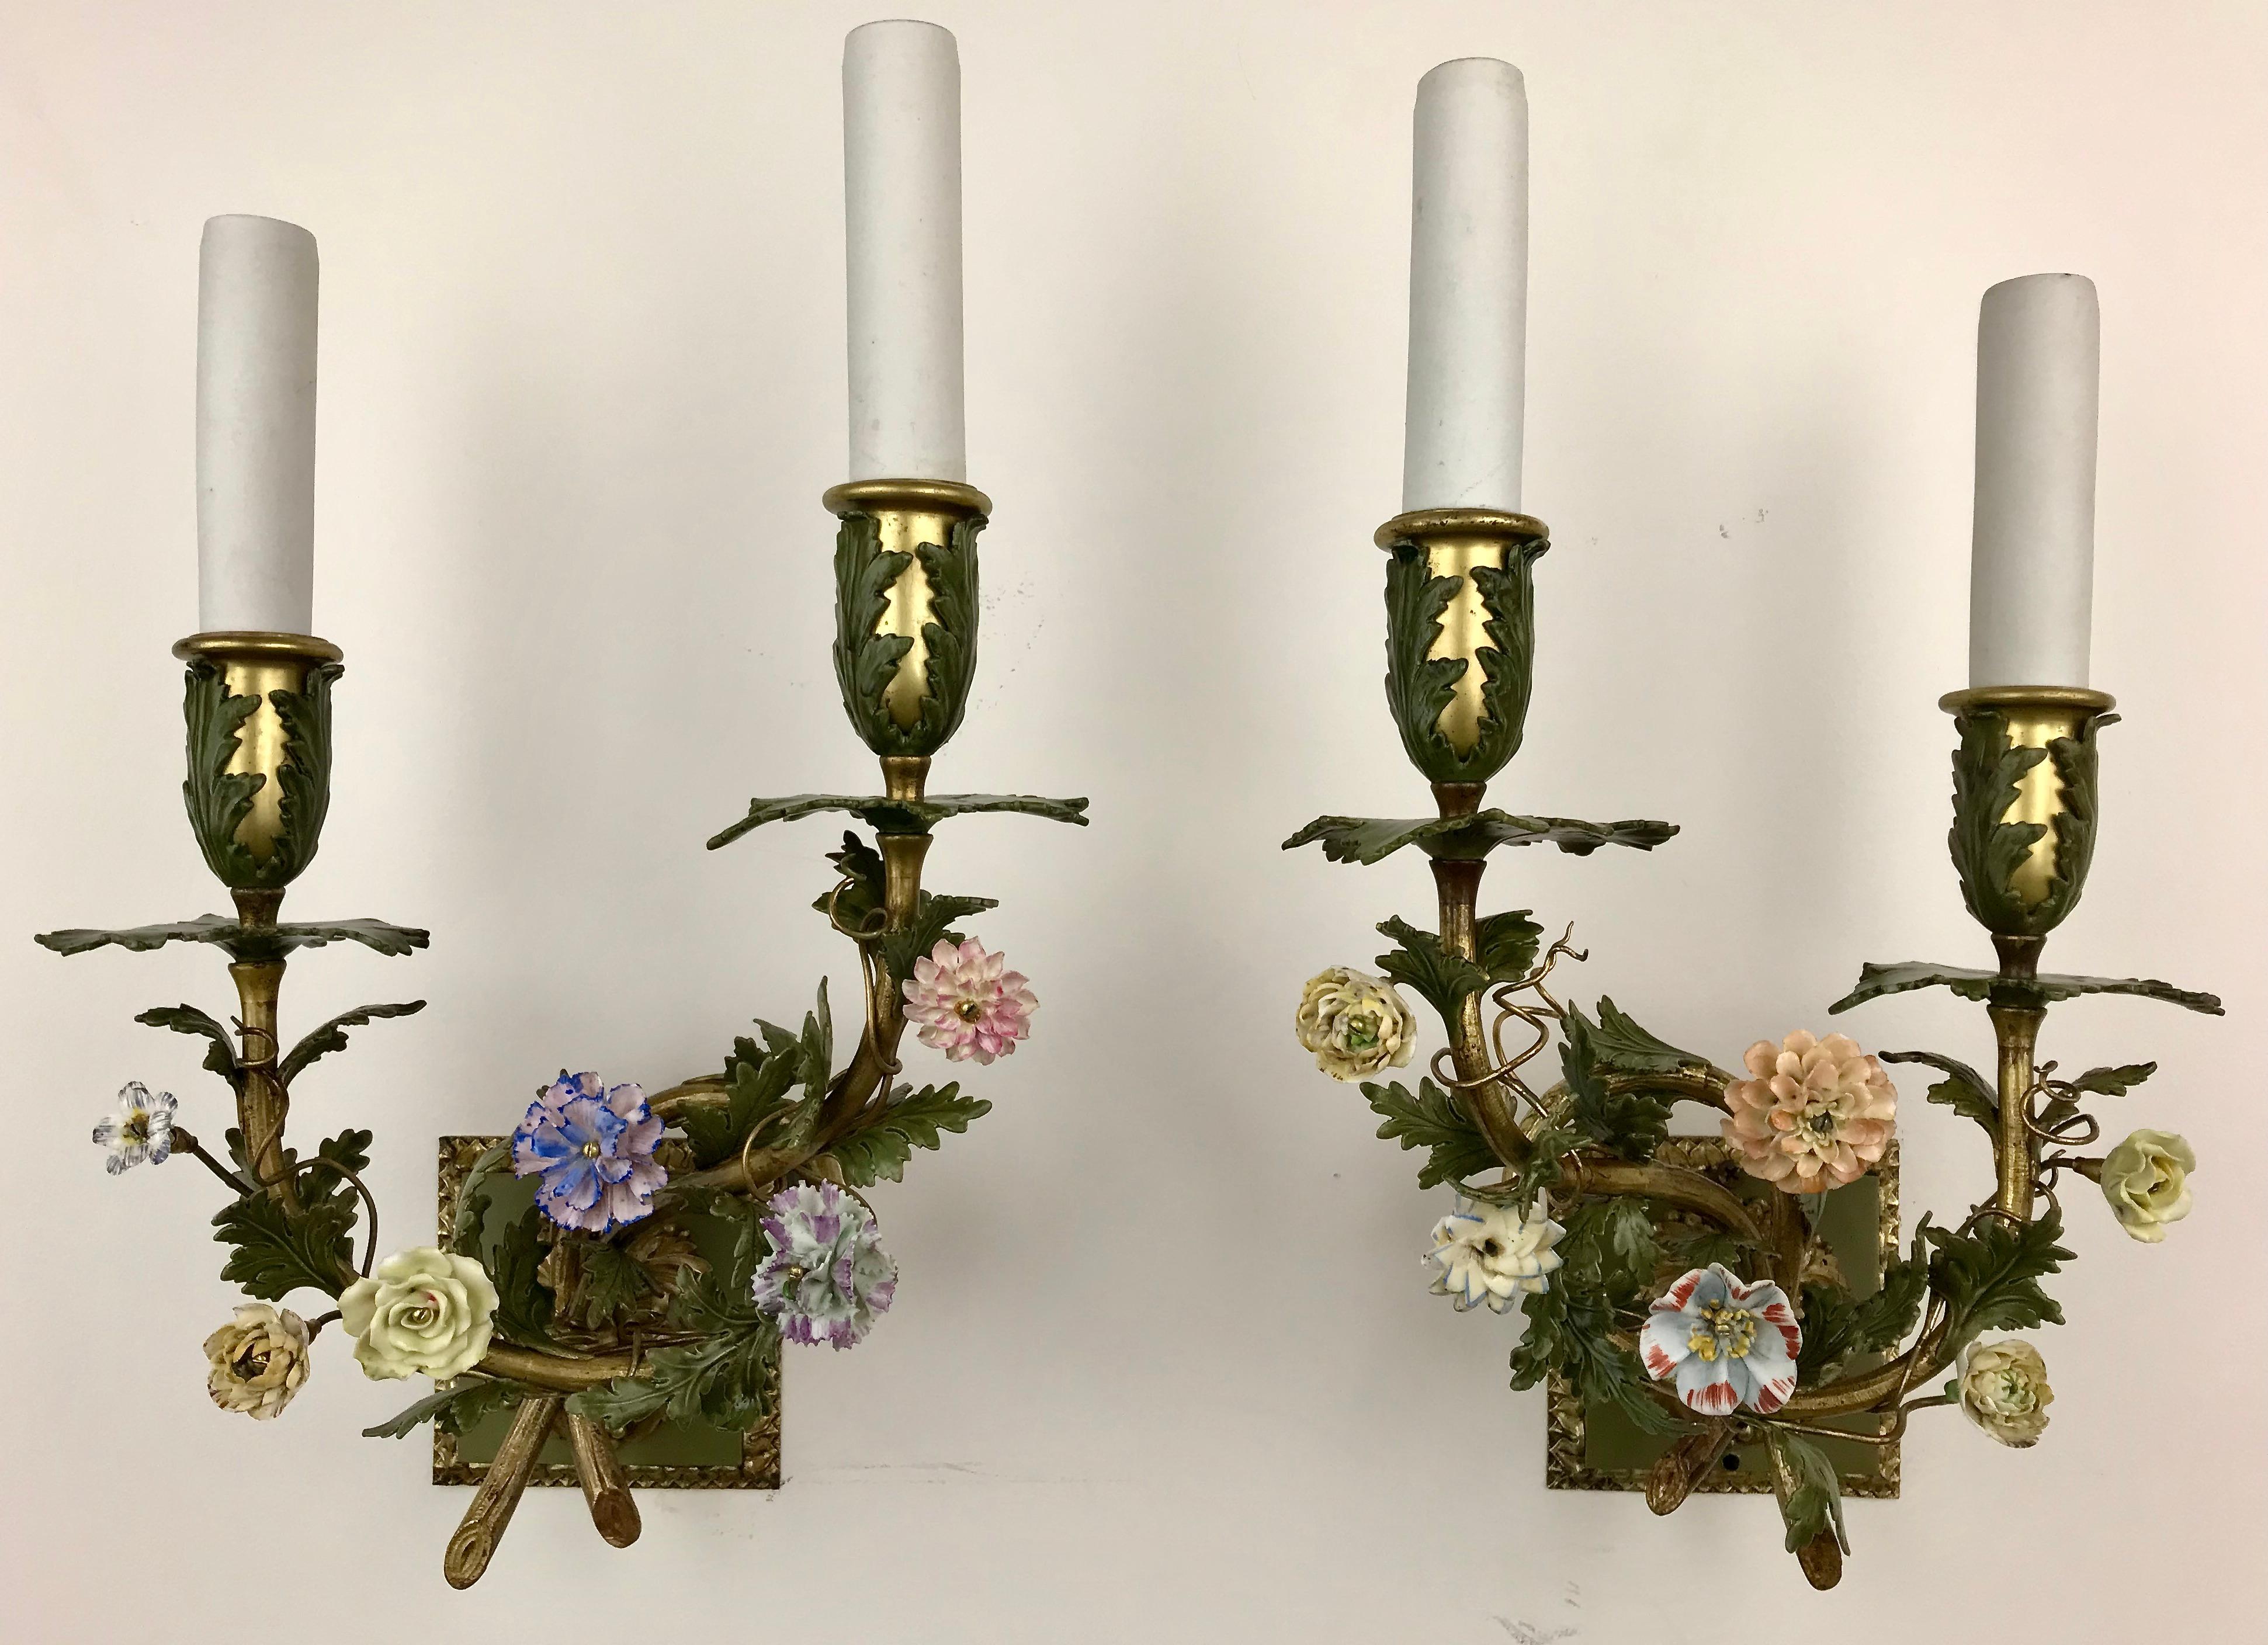 This exquisite pair of two light sconces are by the renown maker Edward F. Caldwell. They feature naturalistic branches with polychrome leaves, and hand painted porcelain flowers.